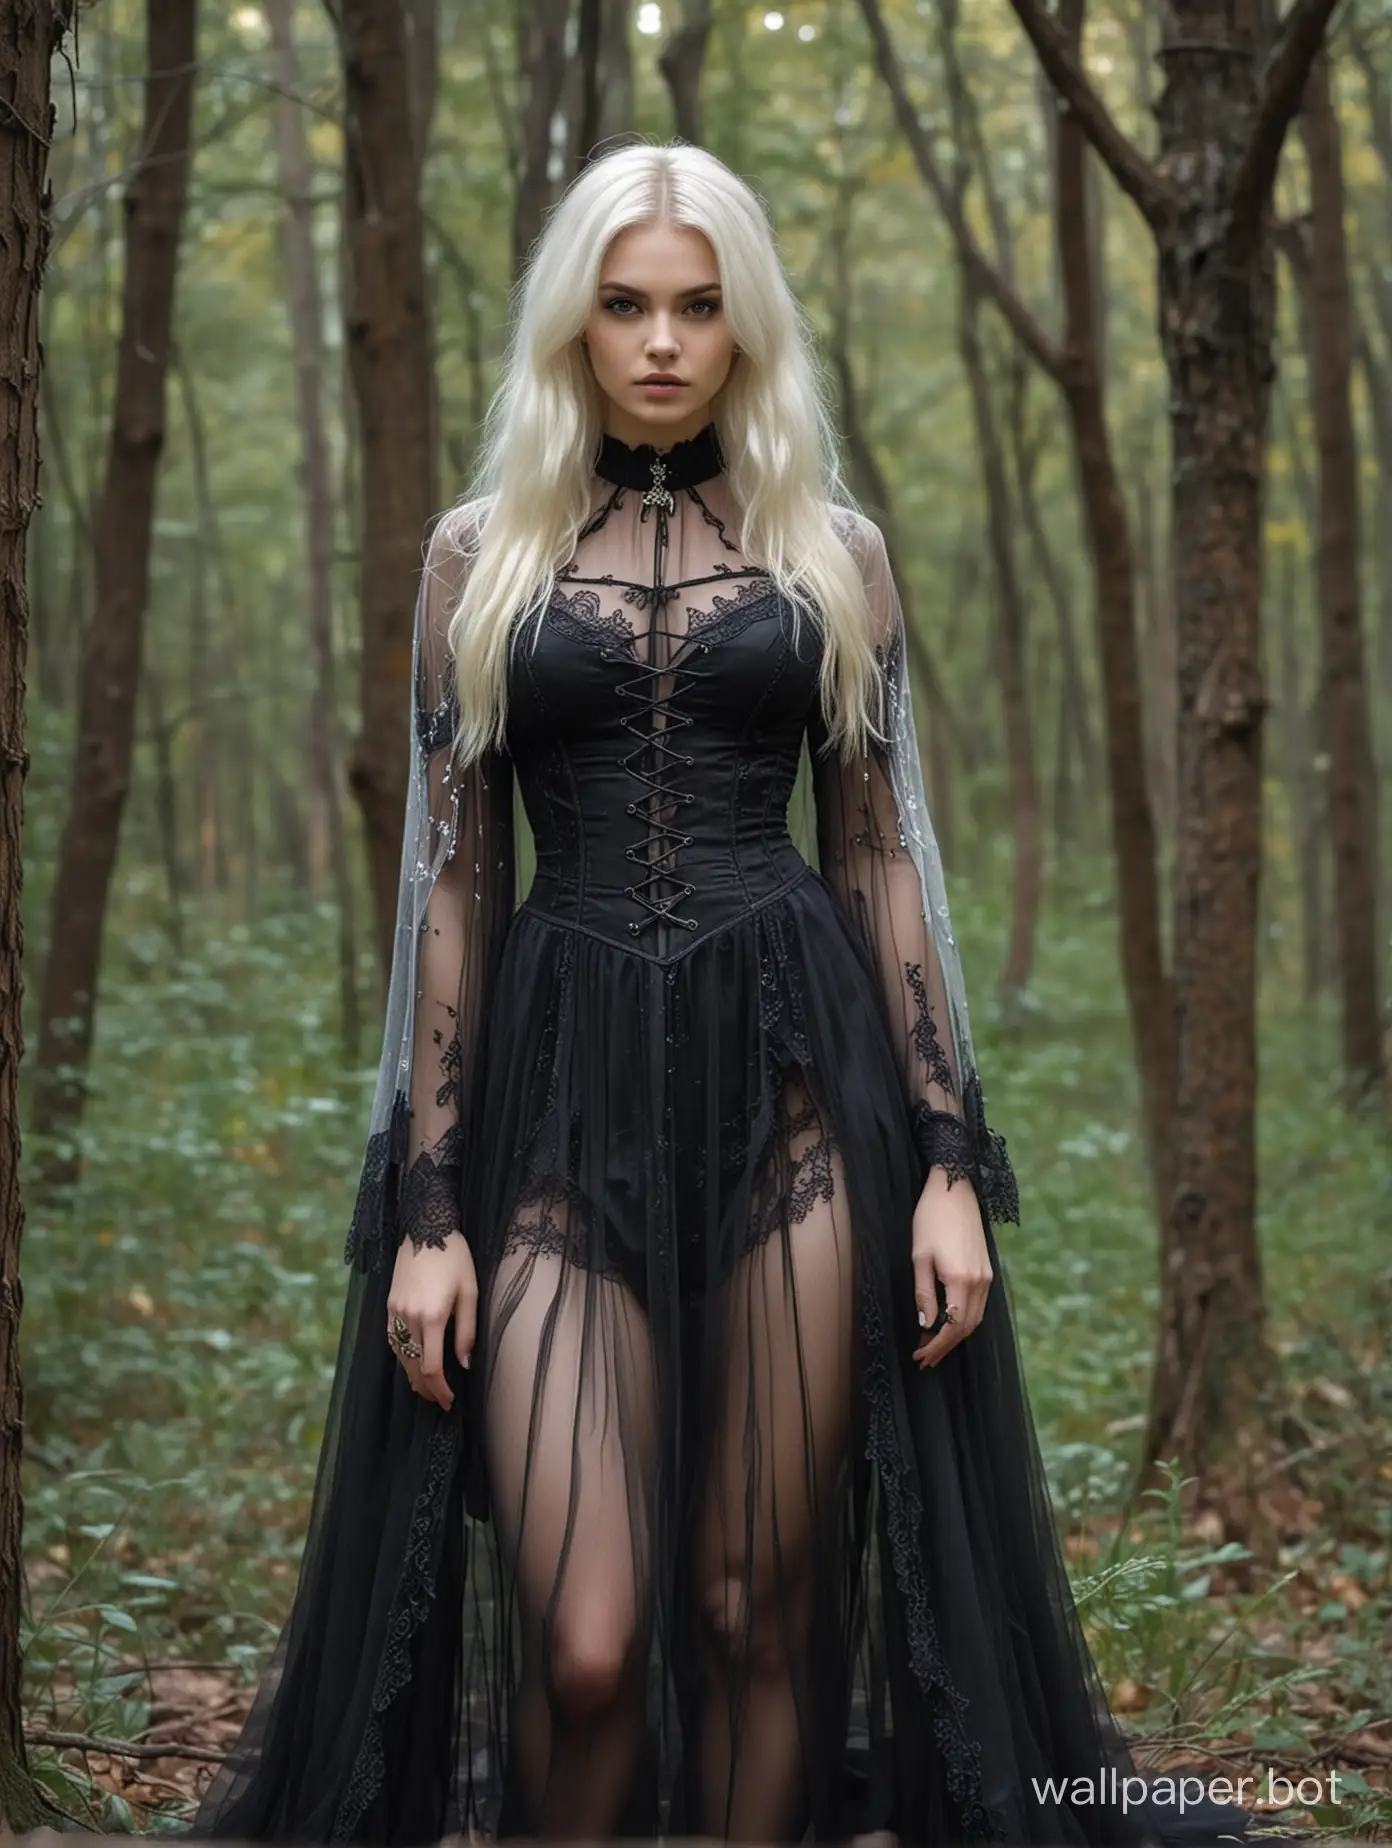 Stunning 18 y.o. Russian Model, platinum blonde hair, in Sheer Gothic Costume Amid Enchanting Forest